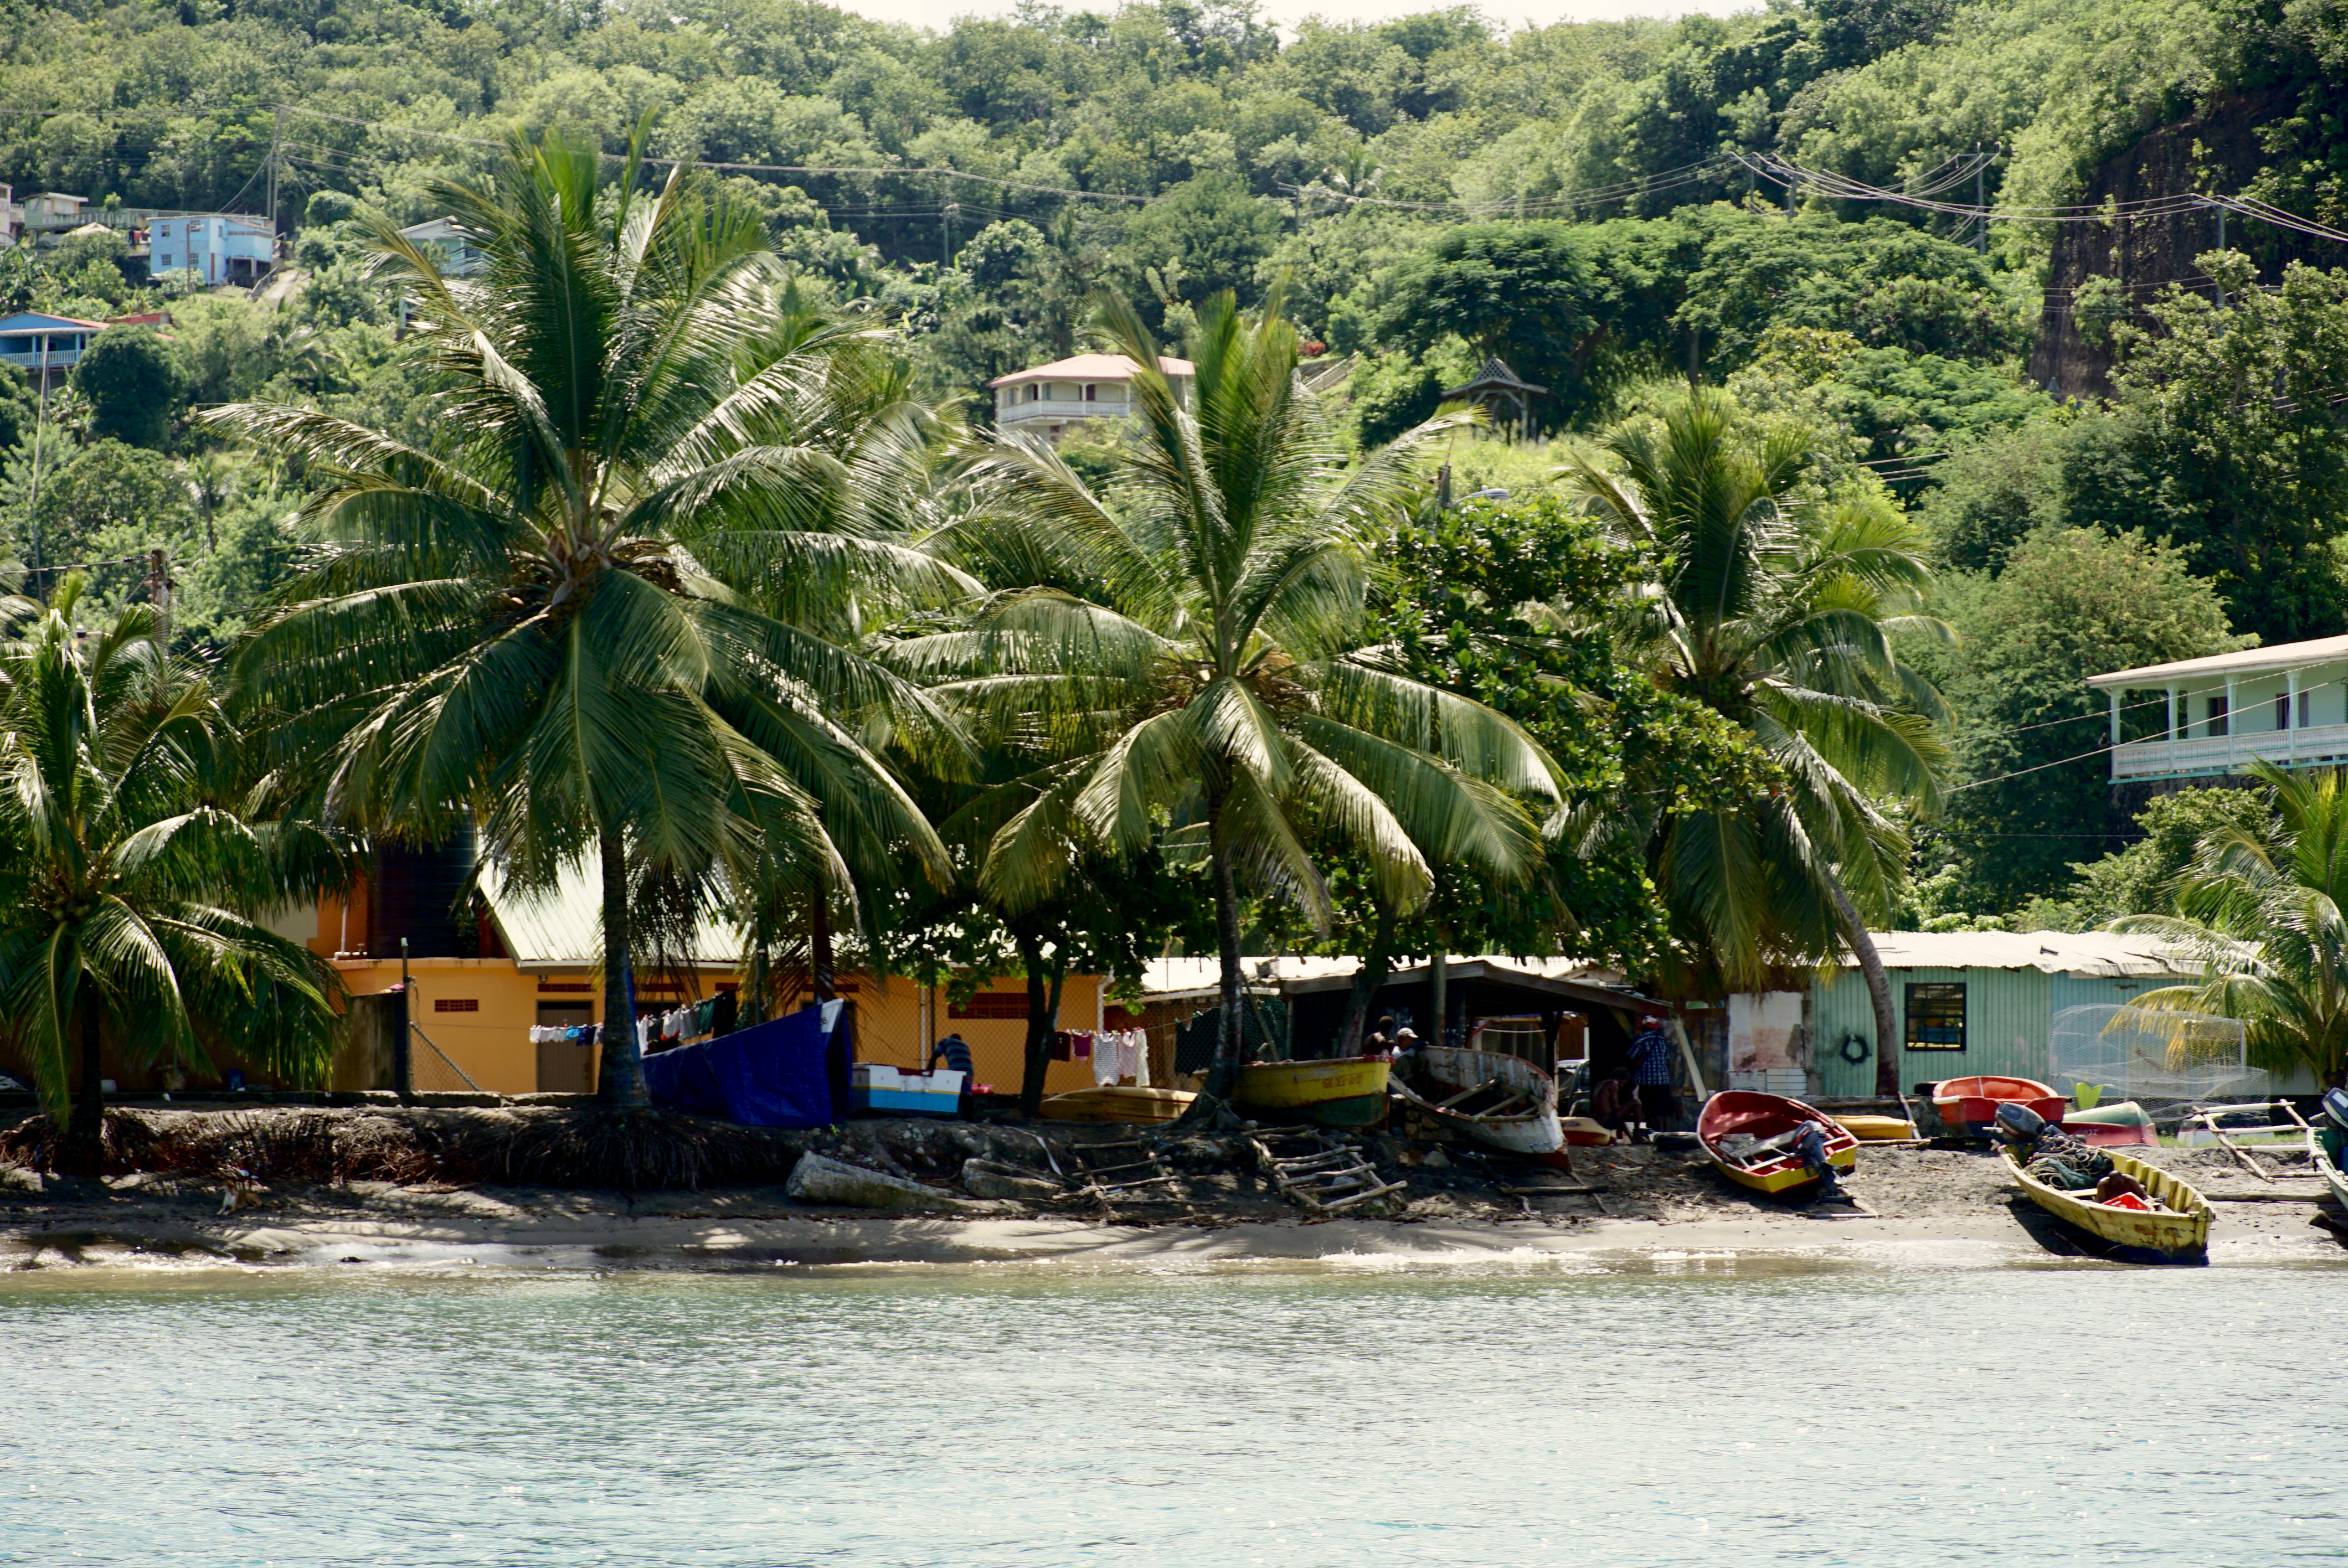 cruising by an old fishing village in St. Lucia, which is best done on a private boat tour in the caribbean